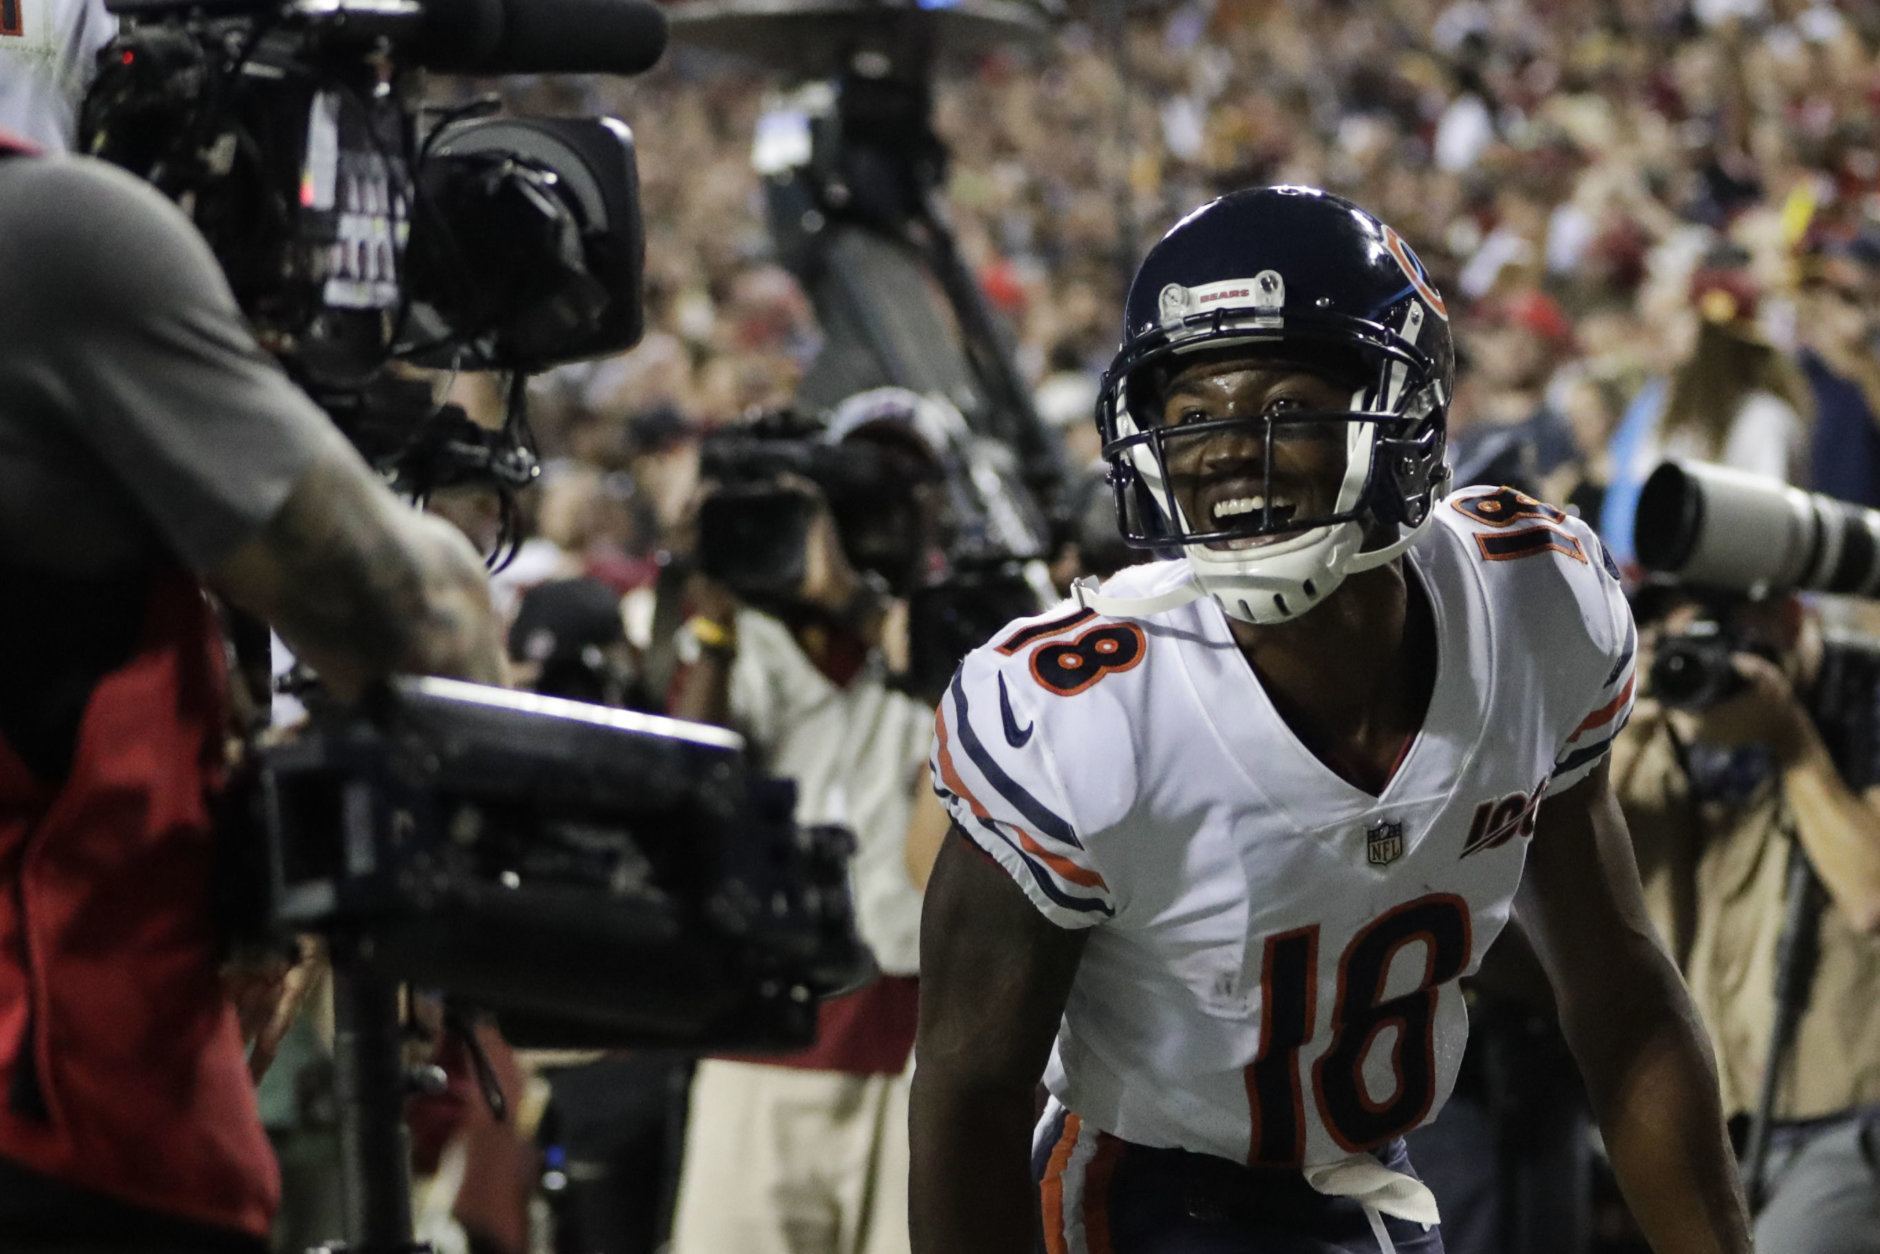 Chicago Bears wide receiver Taylor Gabriel celebrates his touchdown pass during the first half of an NFL football game against the Washington Redskins, Monday, Sept. 23, 2019, in Landover, Md. (AP Photo/Julio Cortez)